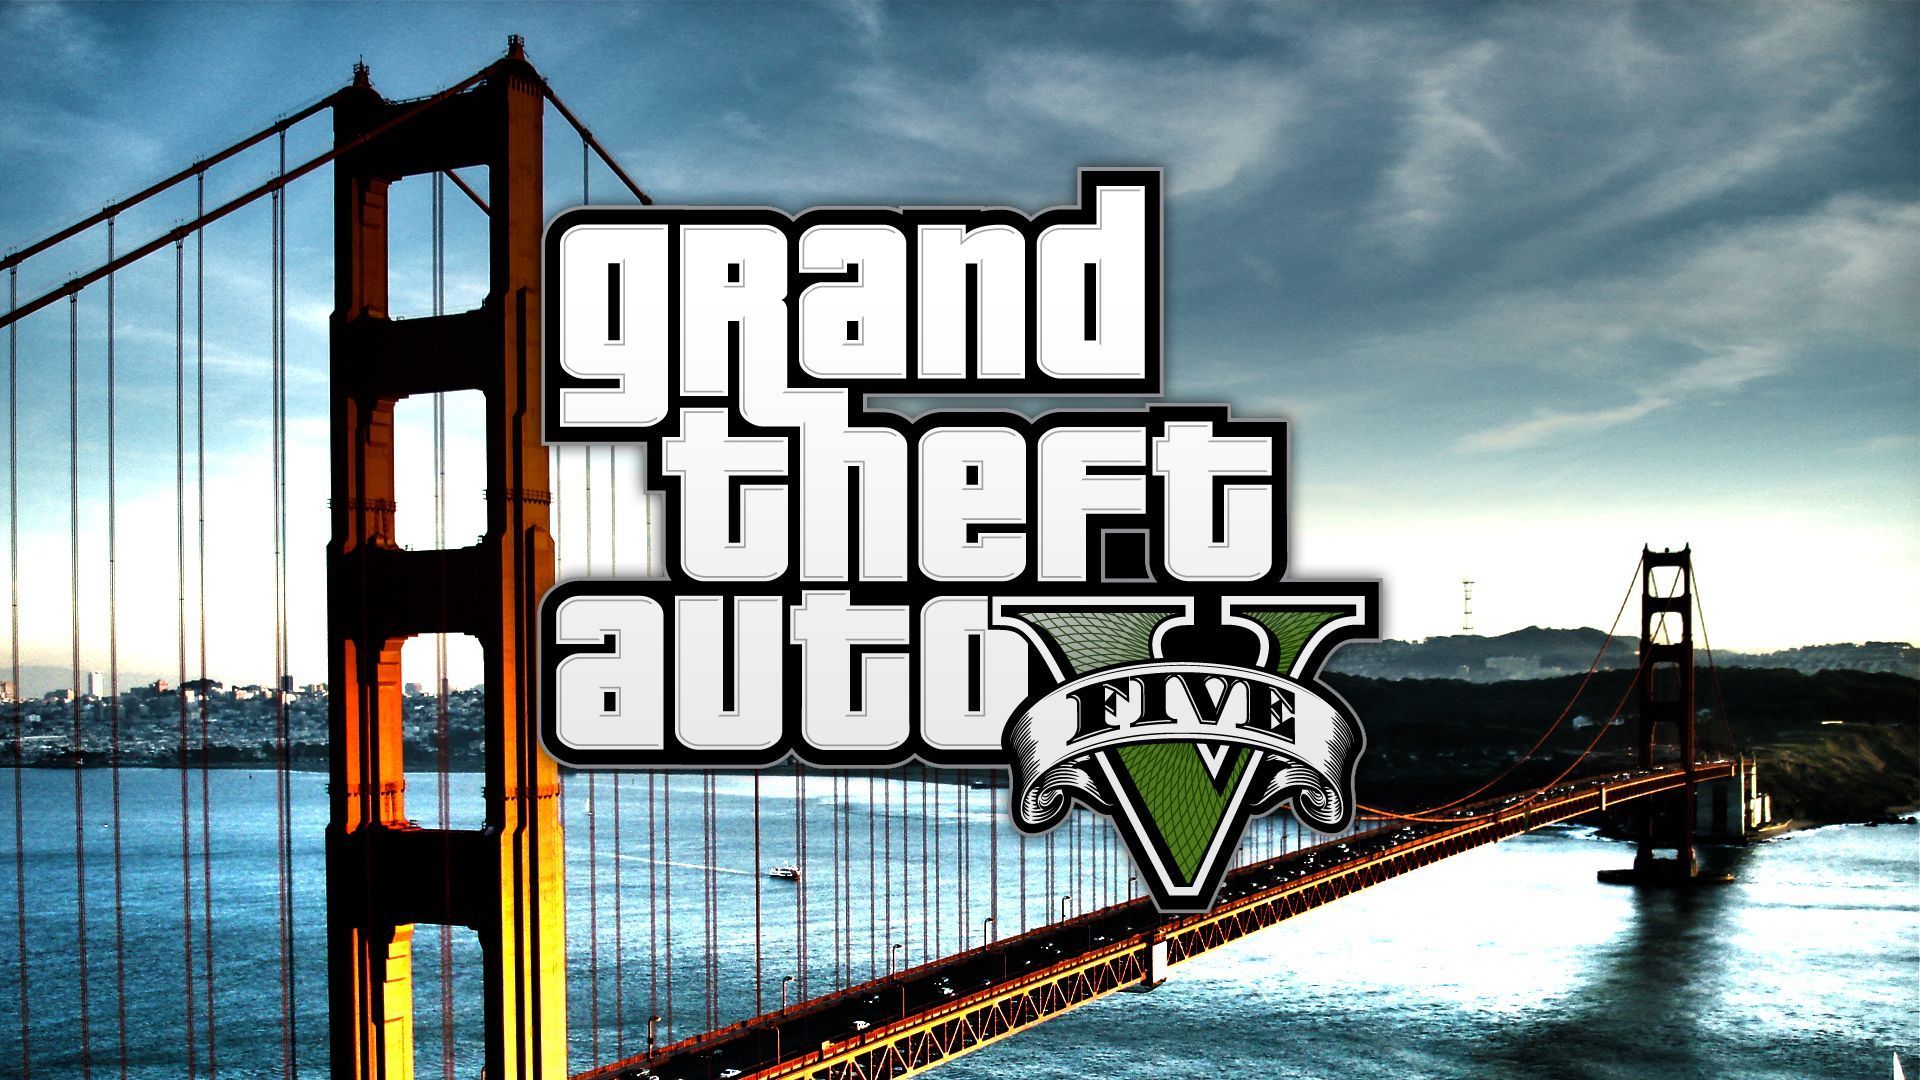 GTA 5 Wallpaper For Desktop and You Like Grand Theft Auto 5 Wallpapers